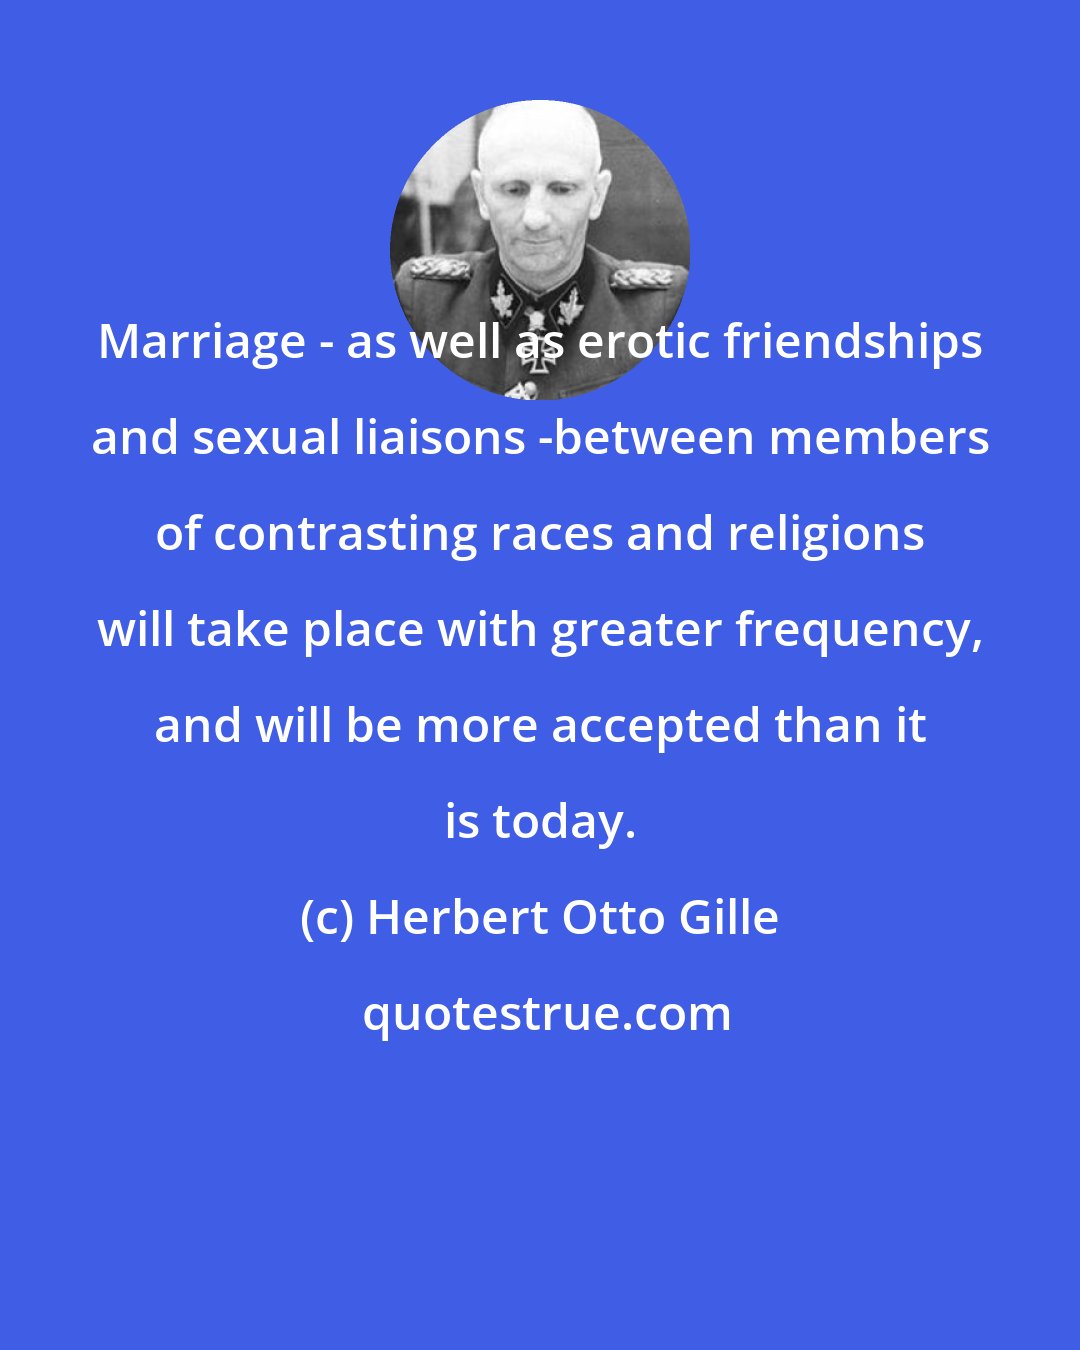 Herbert Otto Gille: Marriage - as well as erotic friendships and sexual liaisons -between members of contrasting races and religions will take place with greater frequency, and will be more accepted than it is today.